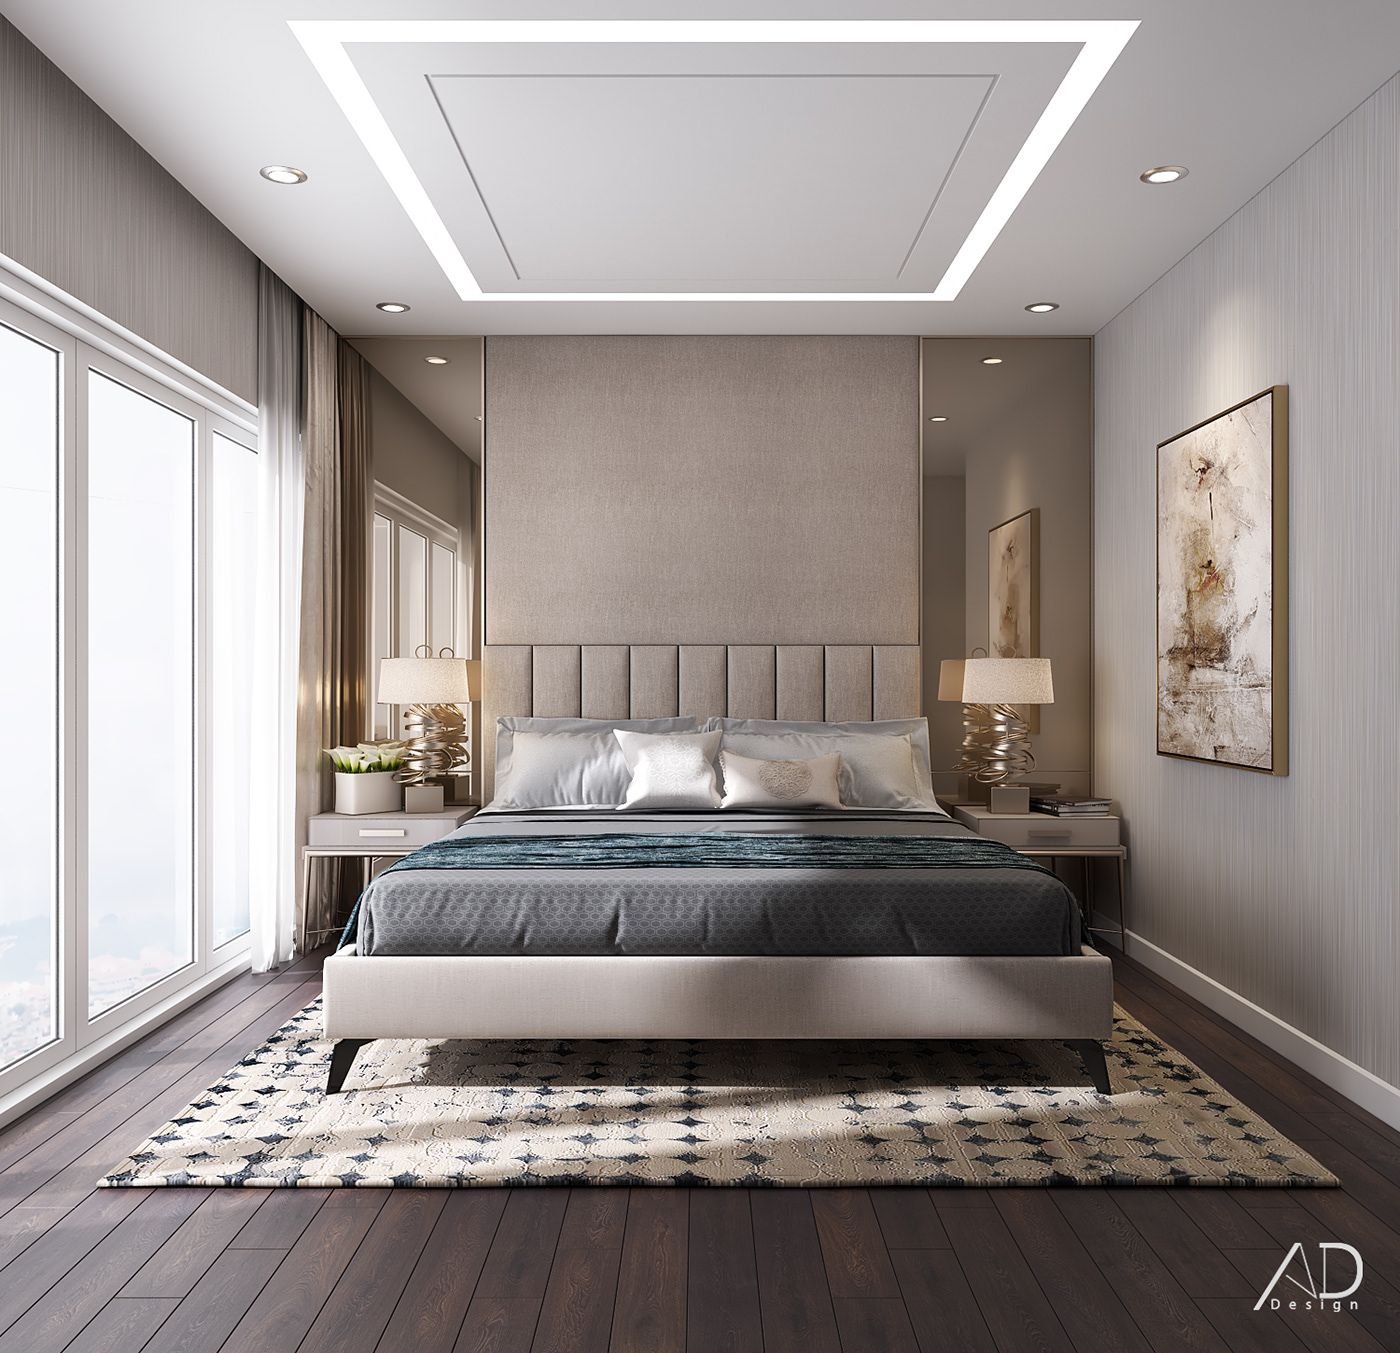 Above All: Transform Your Bedroom With Unique Ceiling Design Concepts